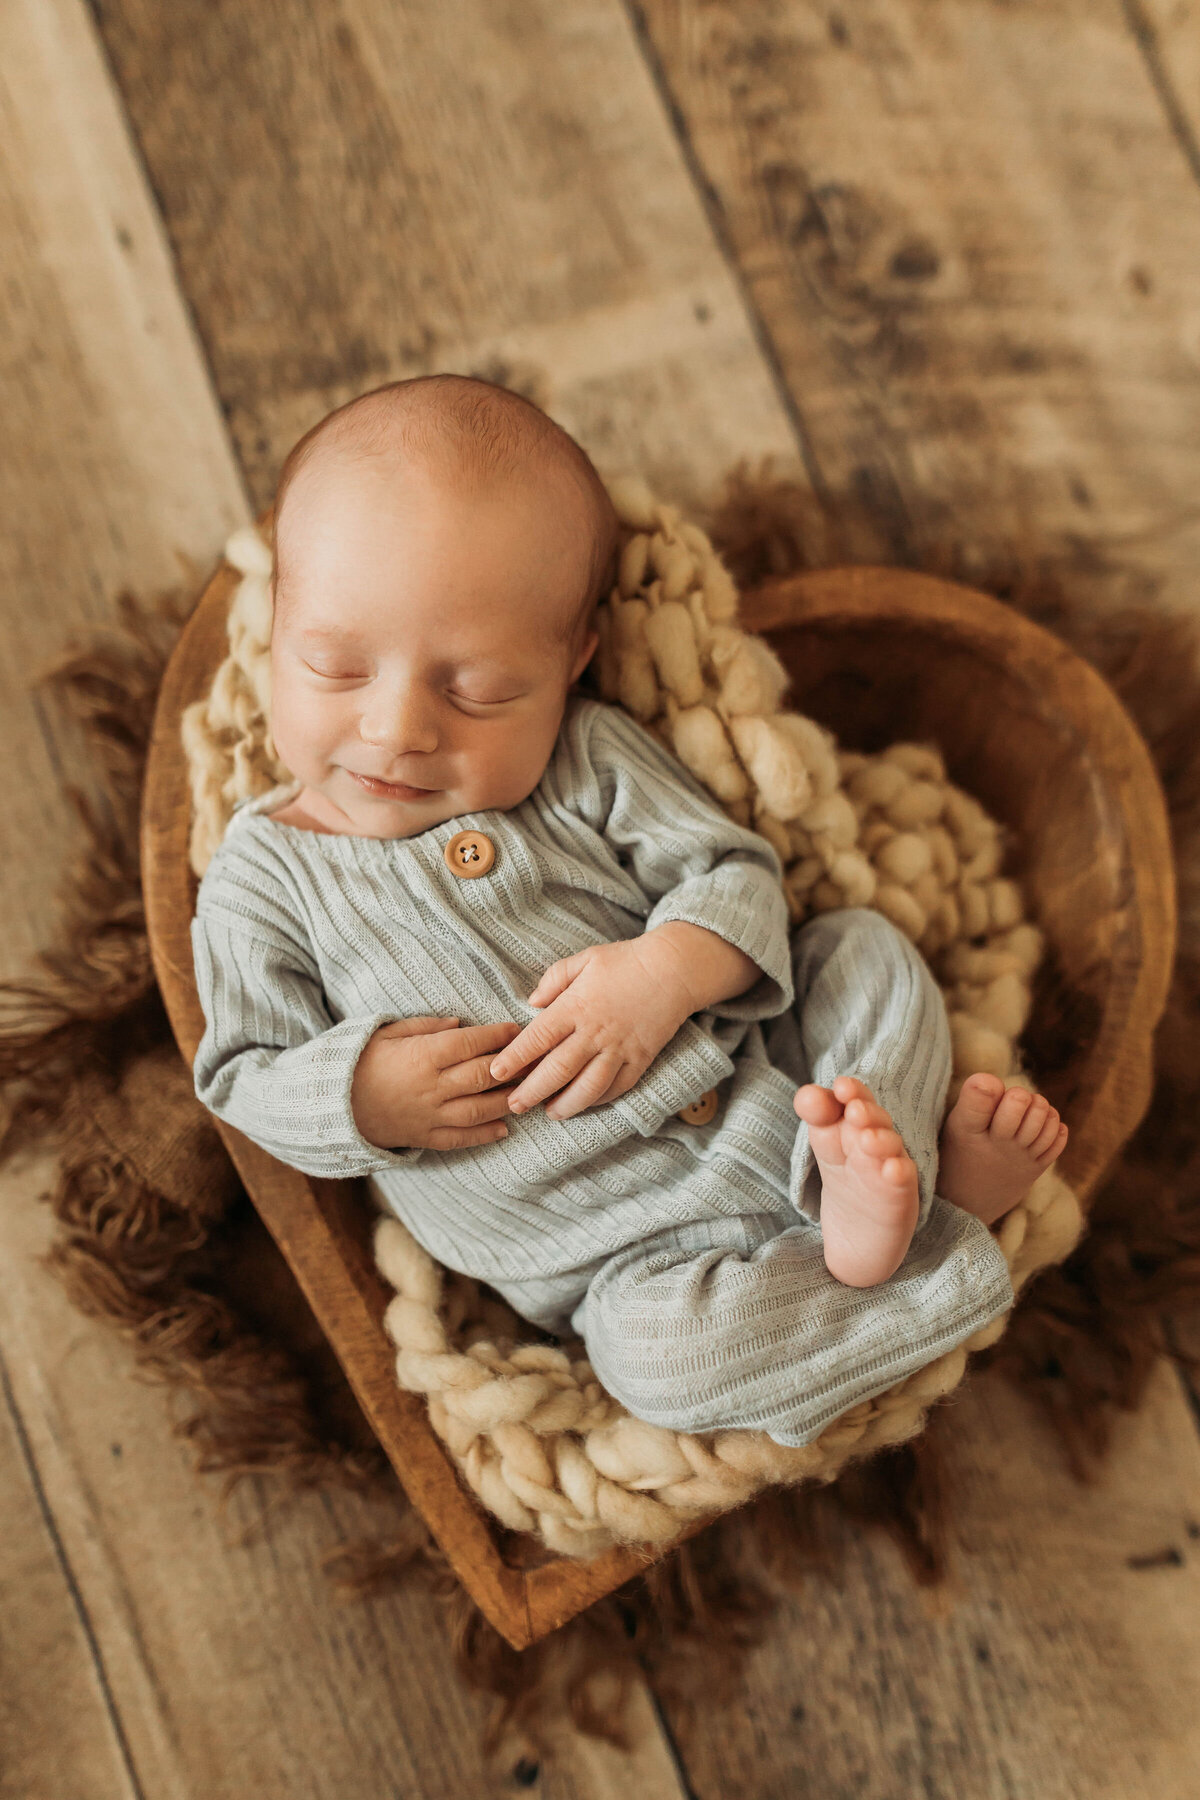 Small baby wearing a blue outfit laying in a heart shaped basket with a smile.